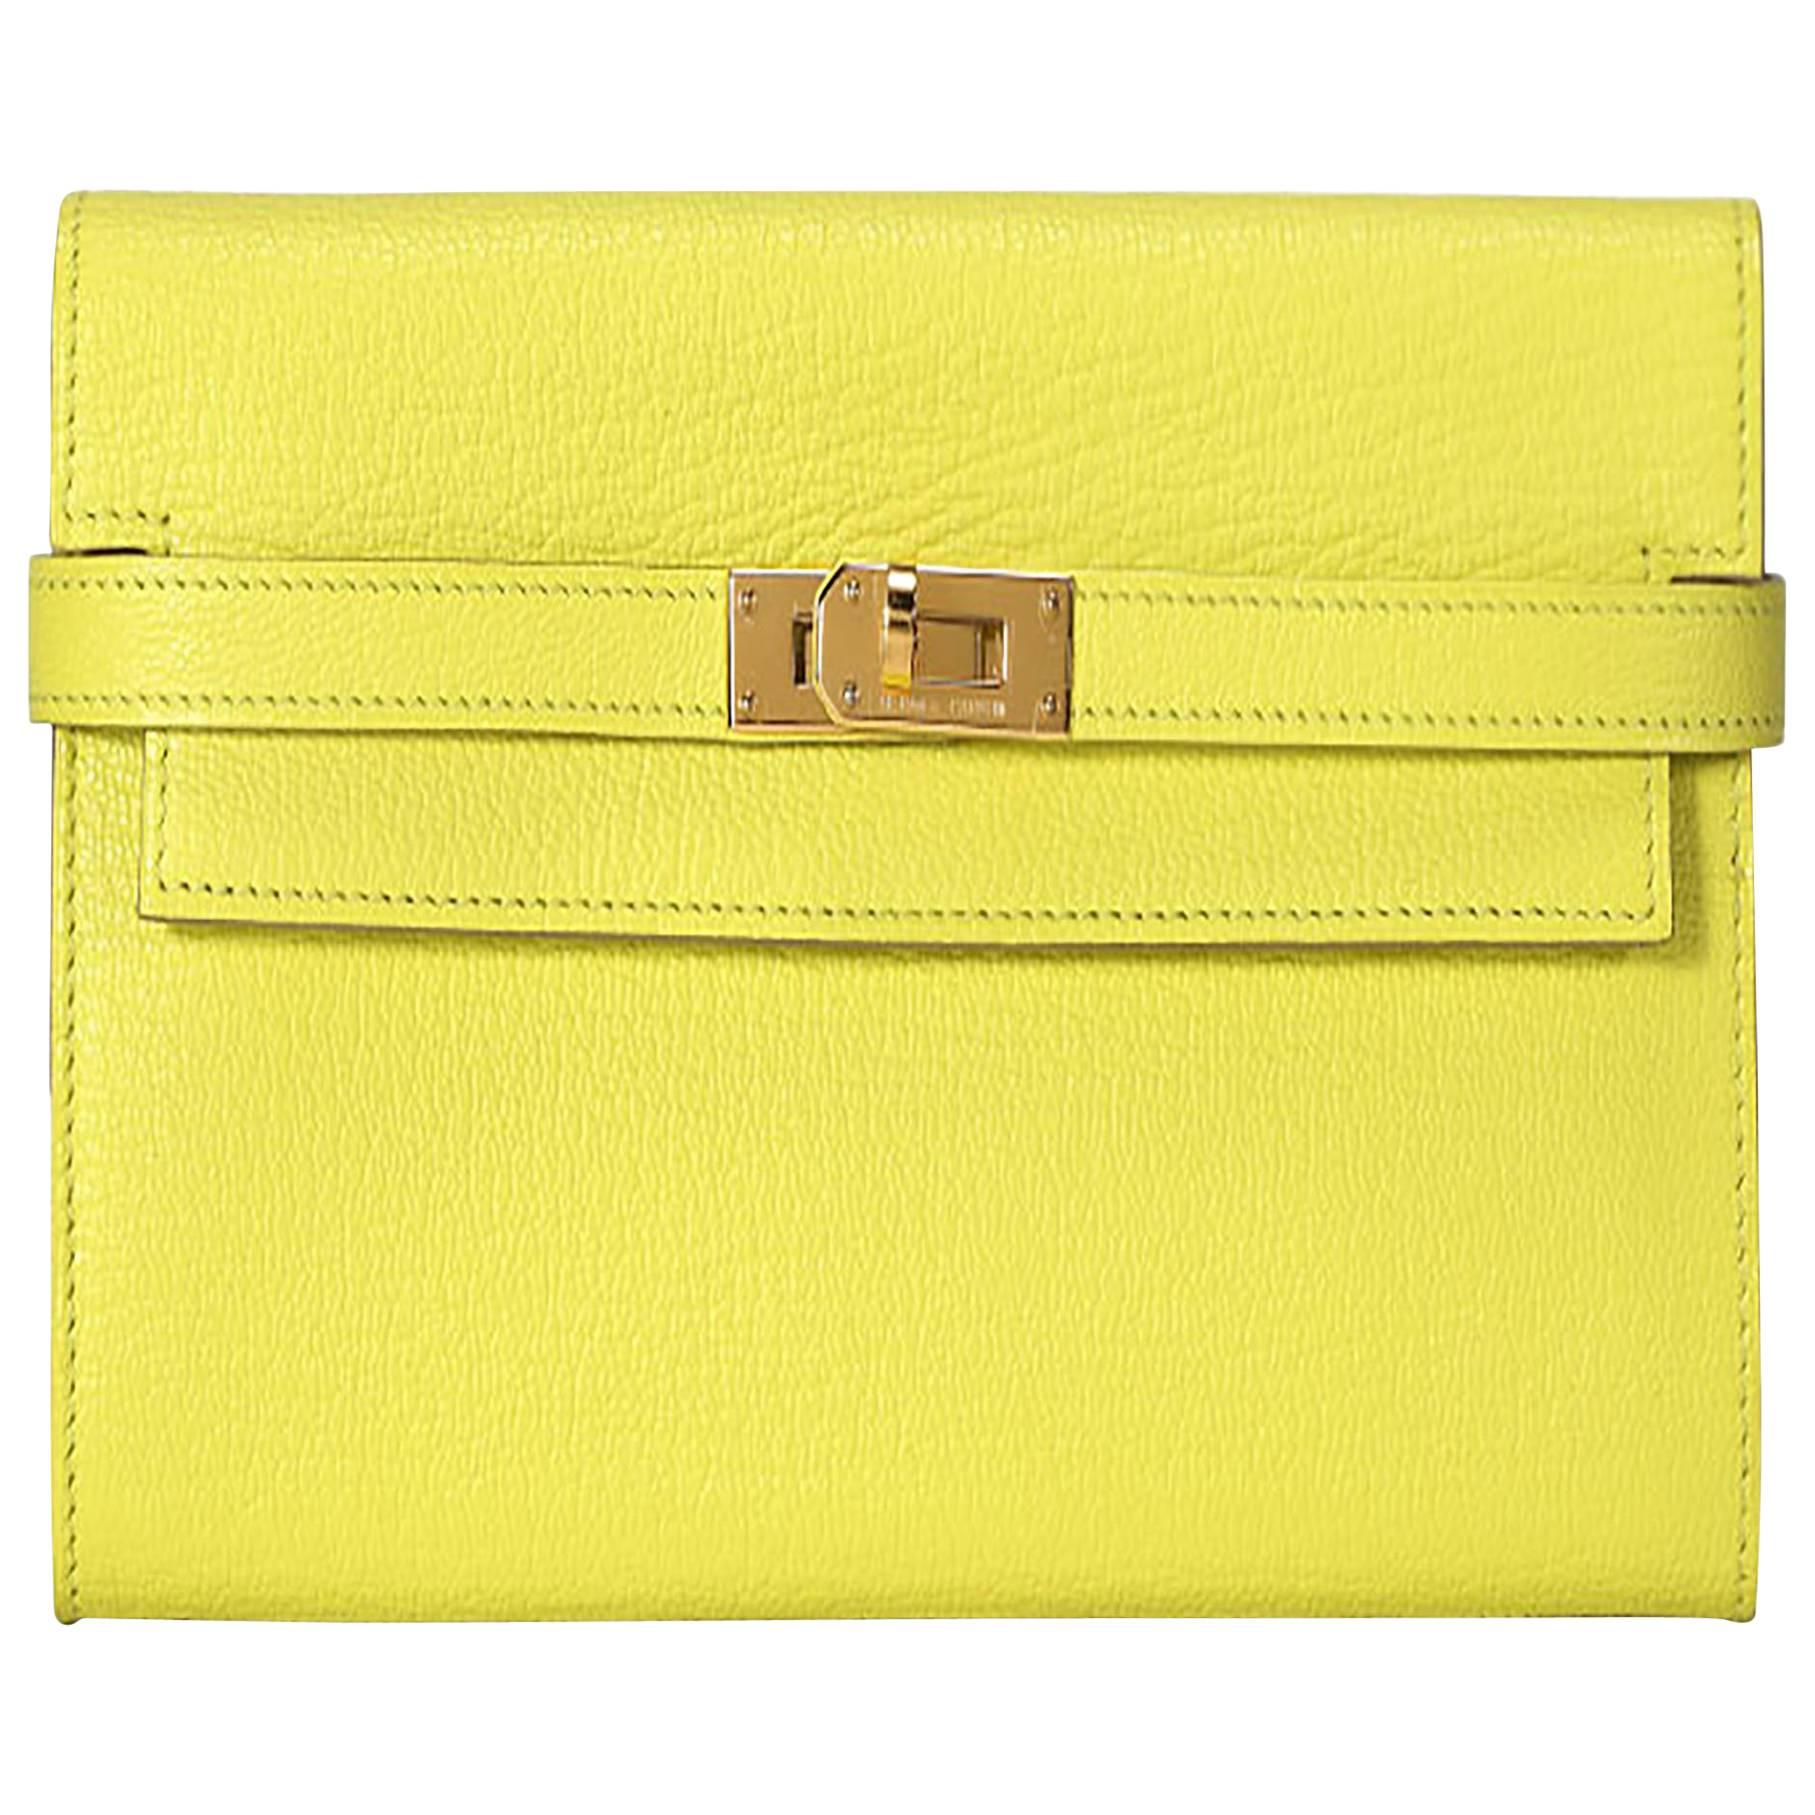 Hermes Kelly Wallet Leather Yellow Color GHW